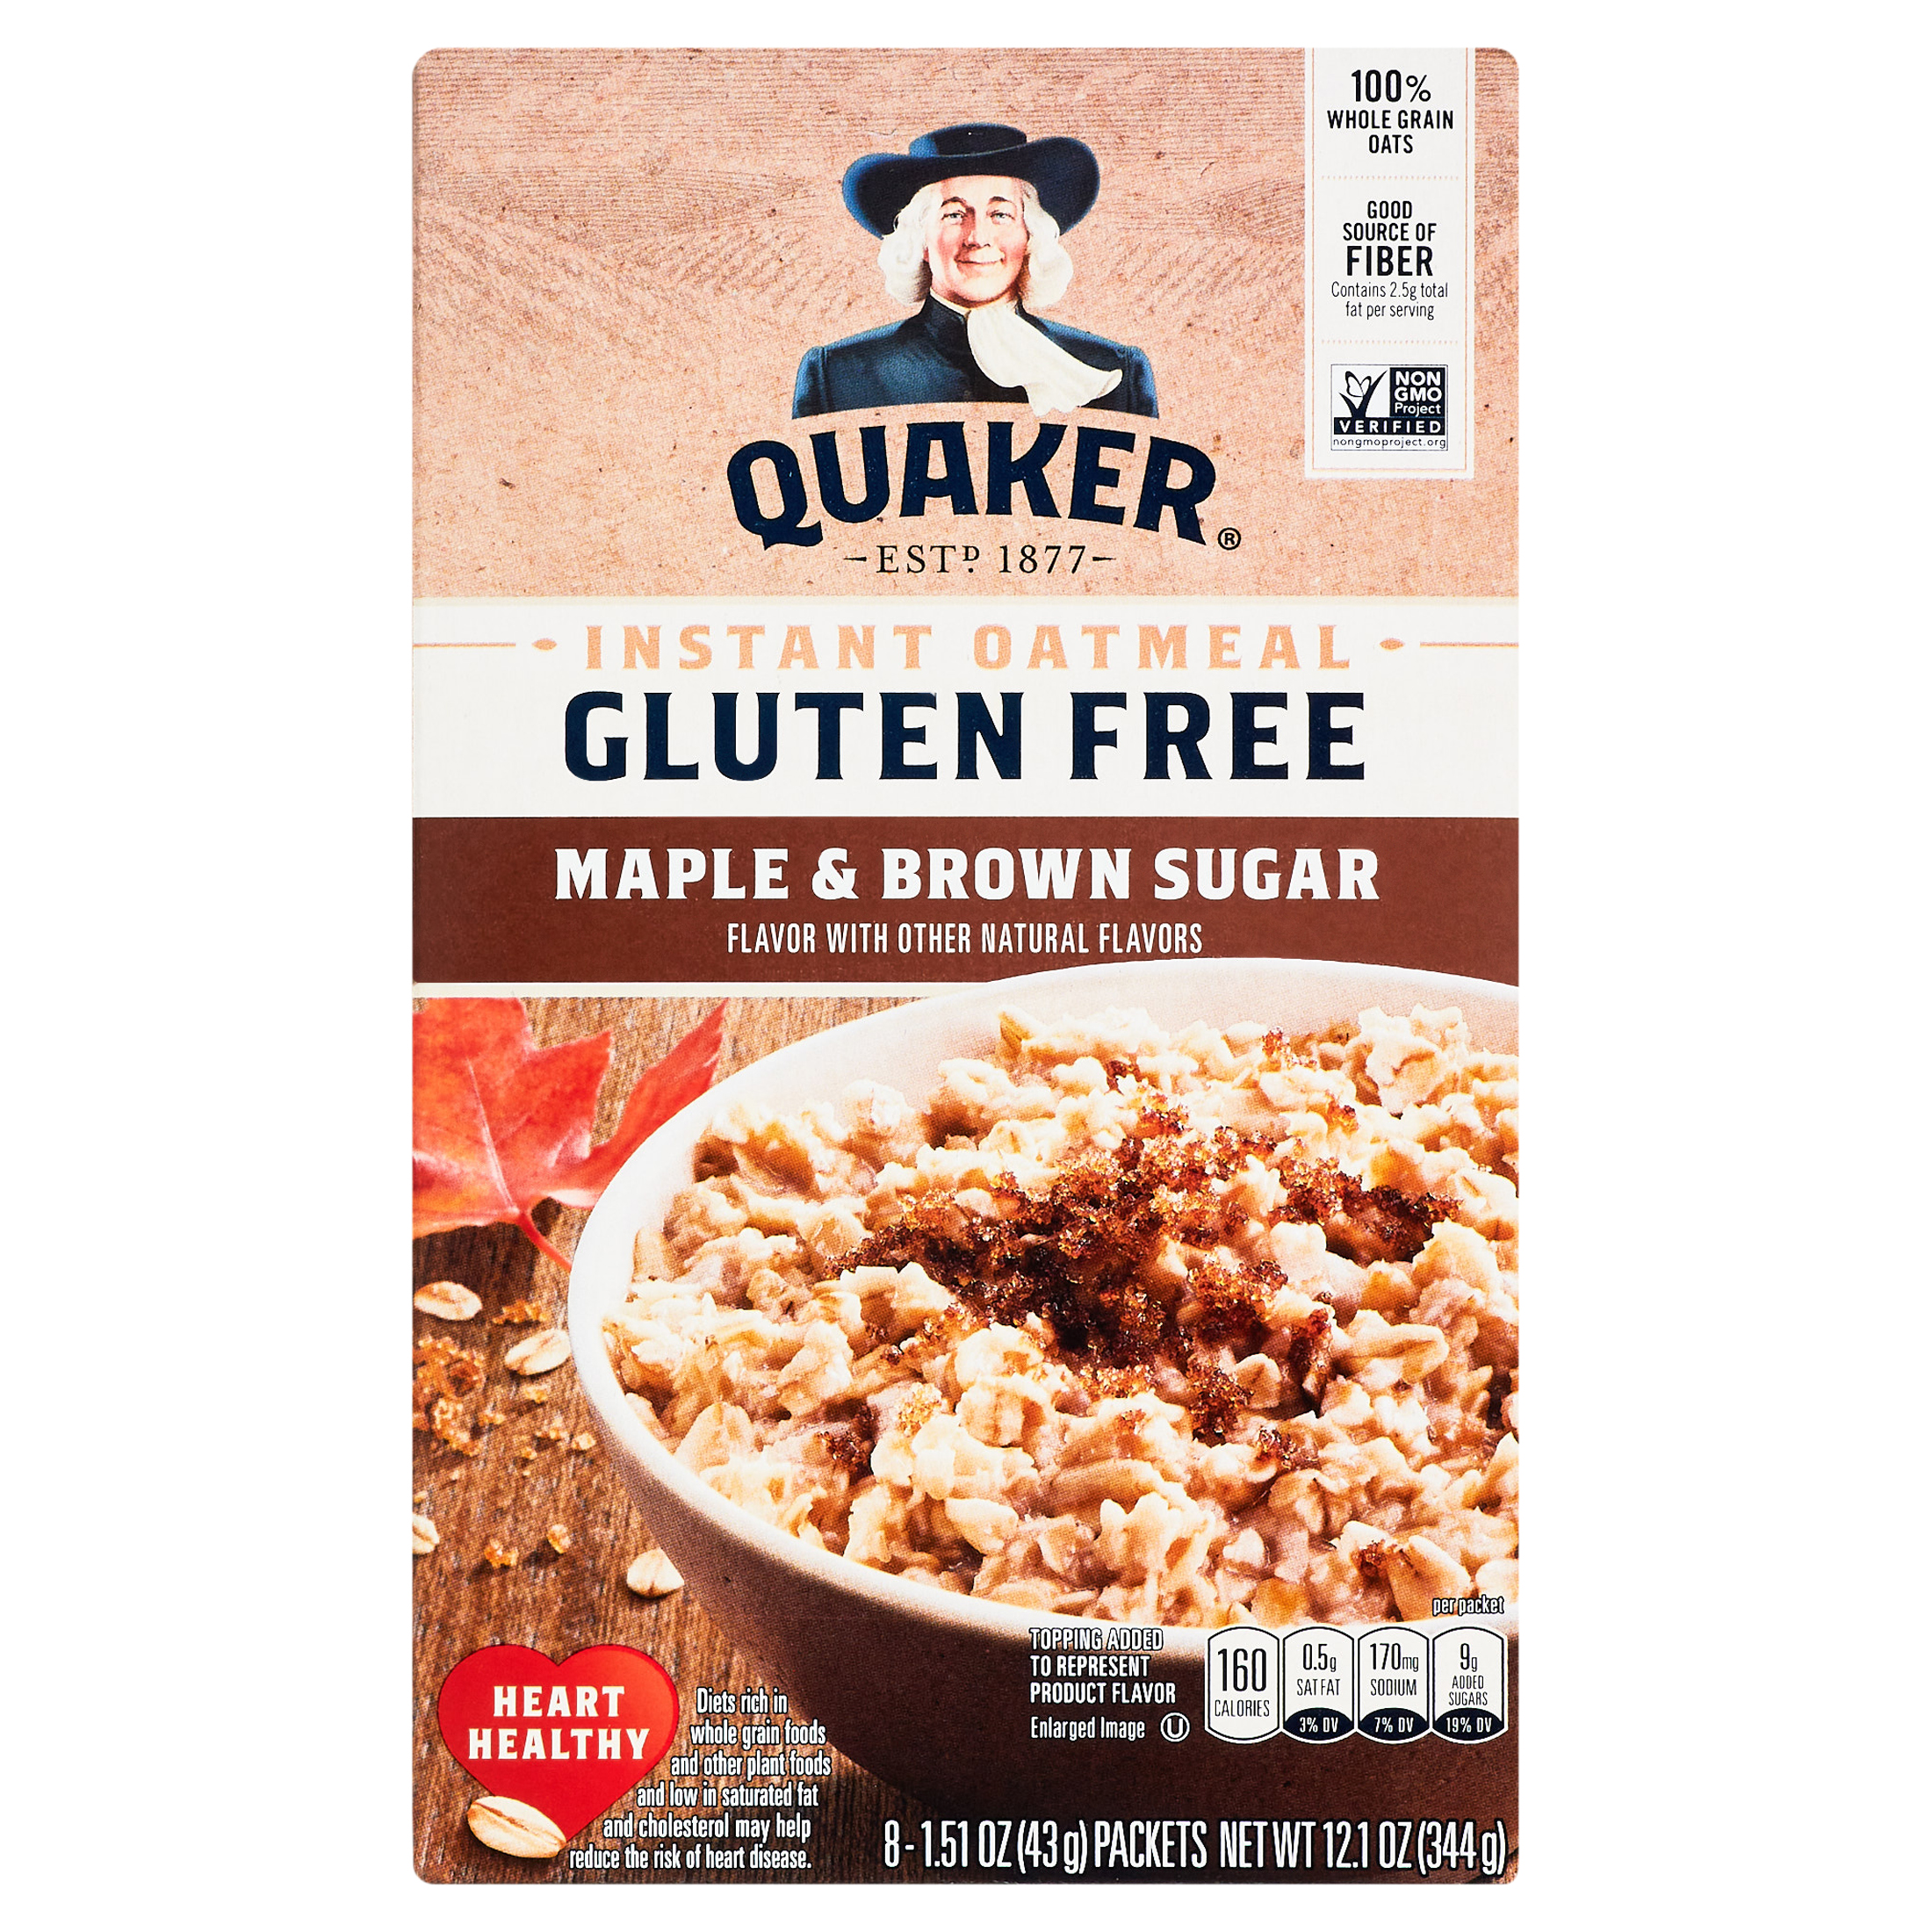 Quaker, Instant Oatmeal, Gluten Free, Maple & Brown Sugar, 1.51 oz, 8 Packets - image 3 of 13